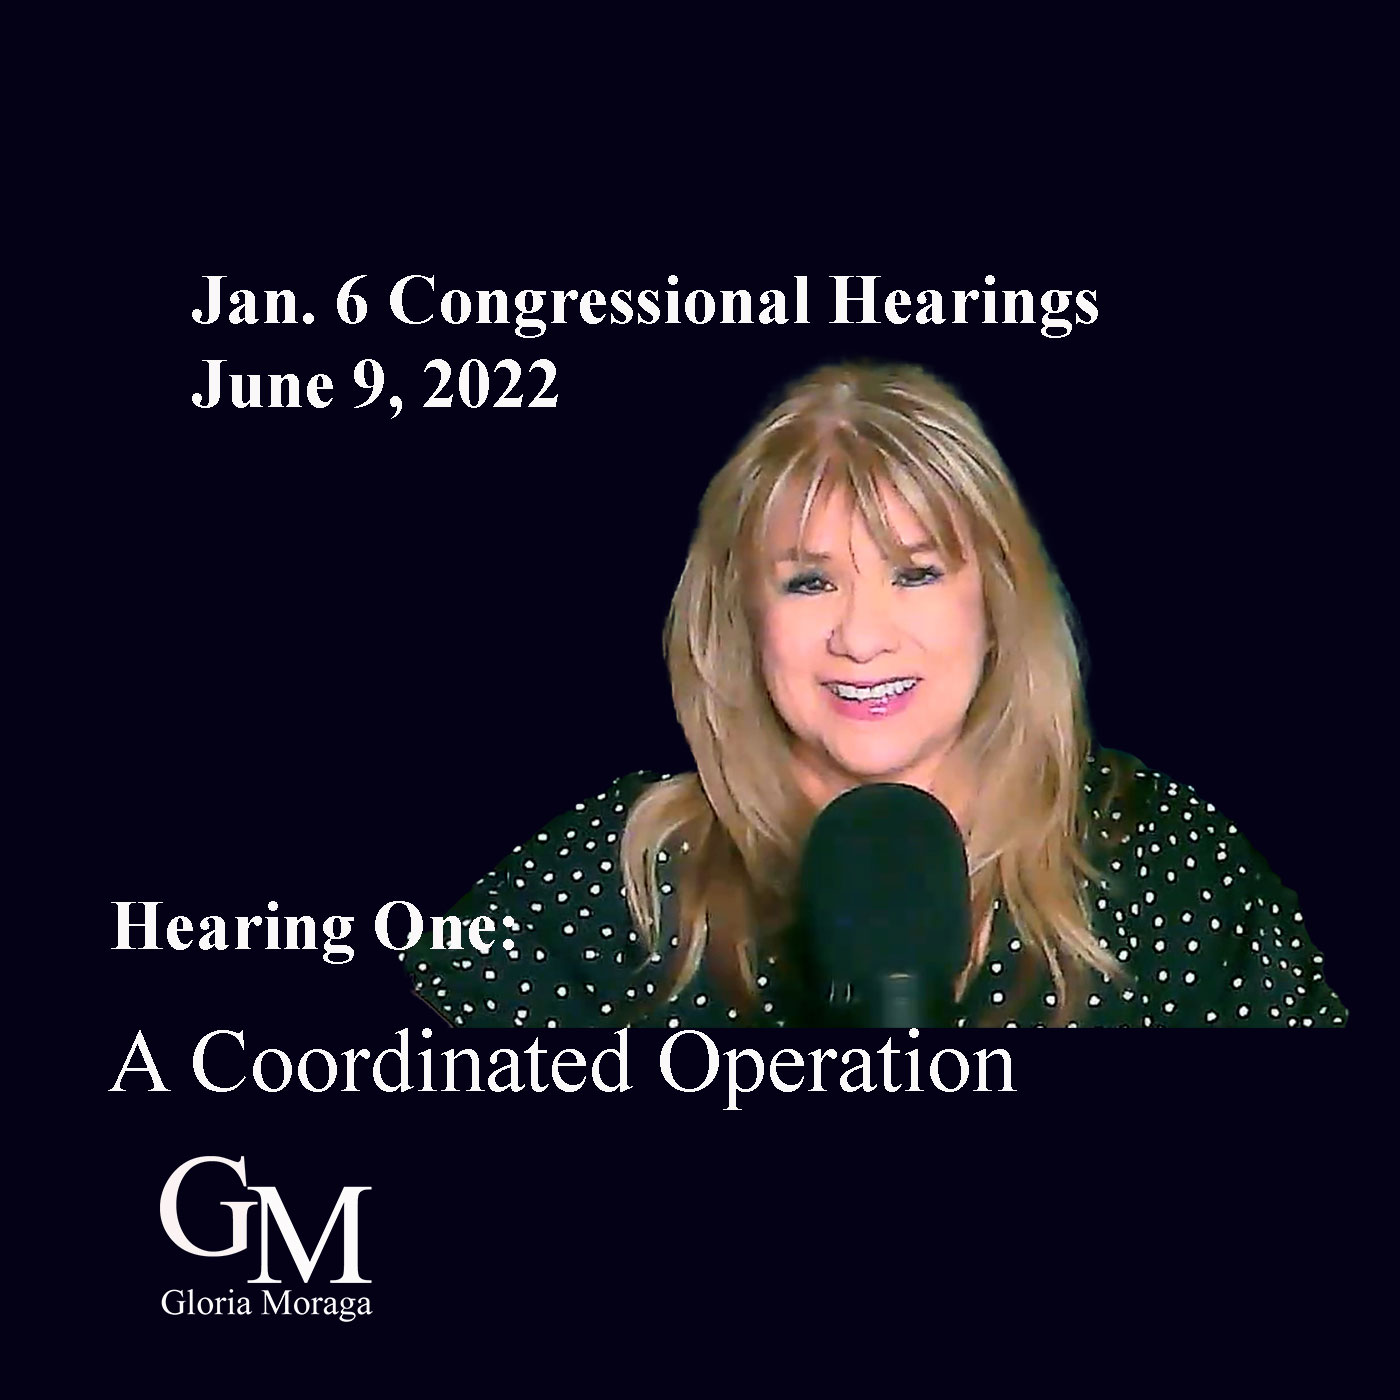 The First January 6 Congressional Hearing - A "Coordinated Operation"